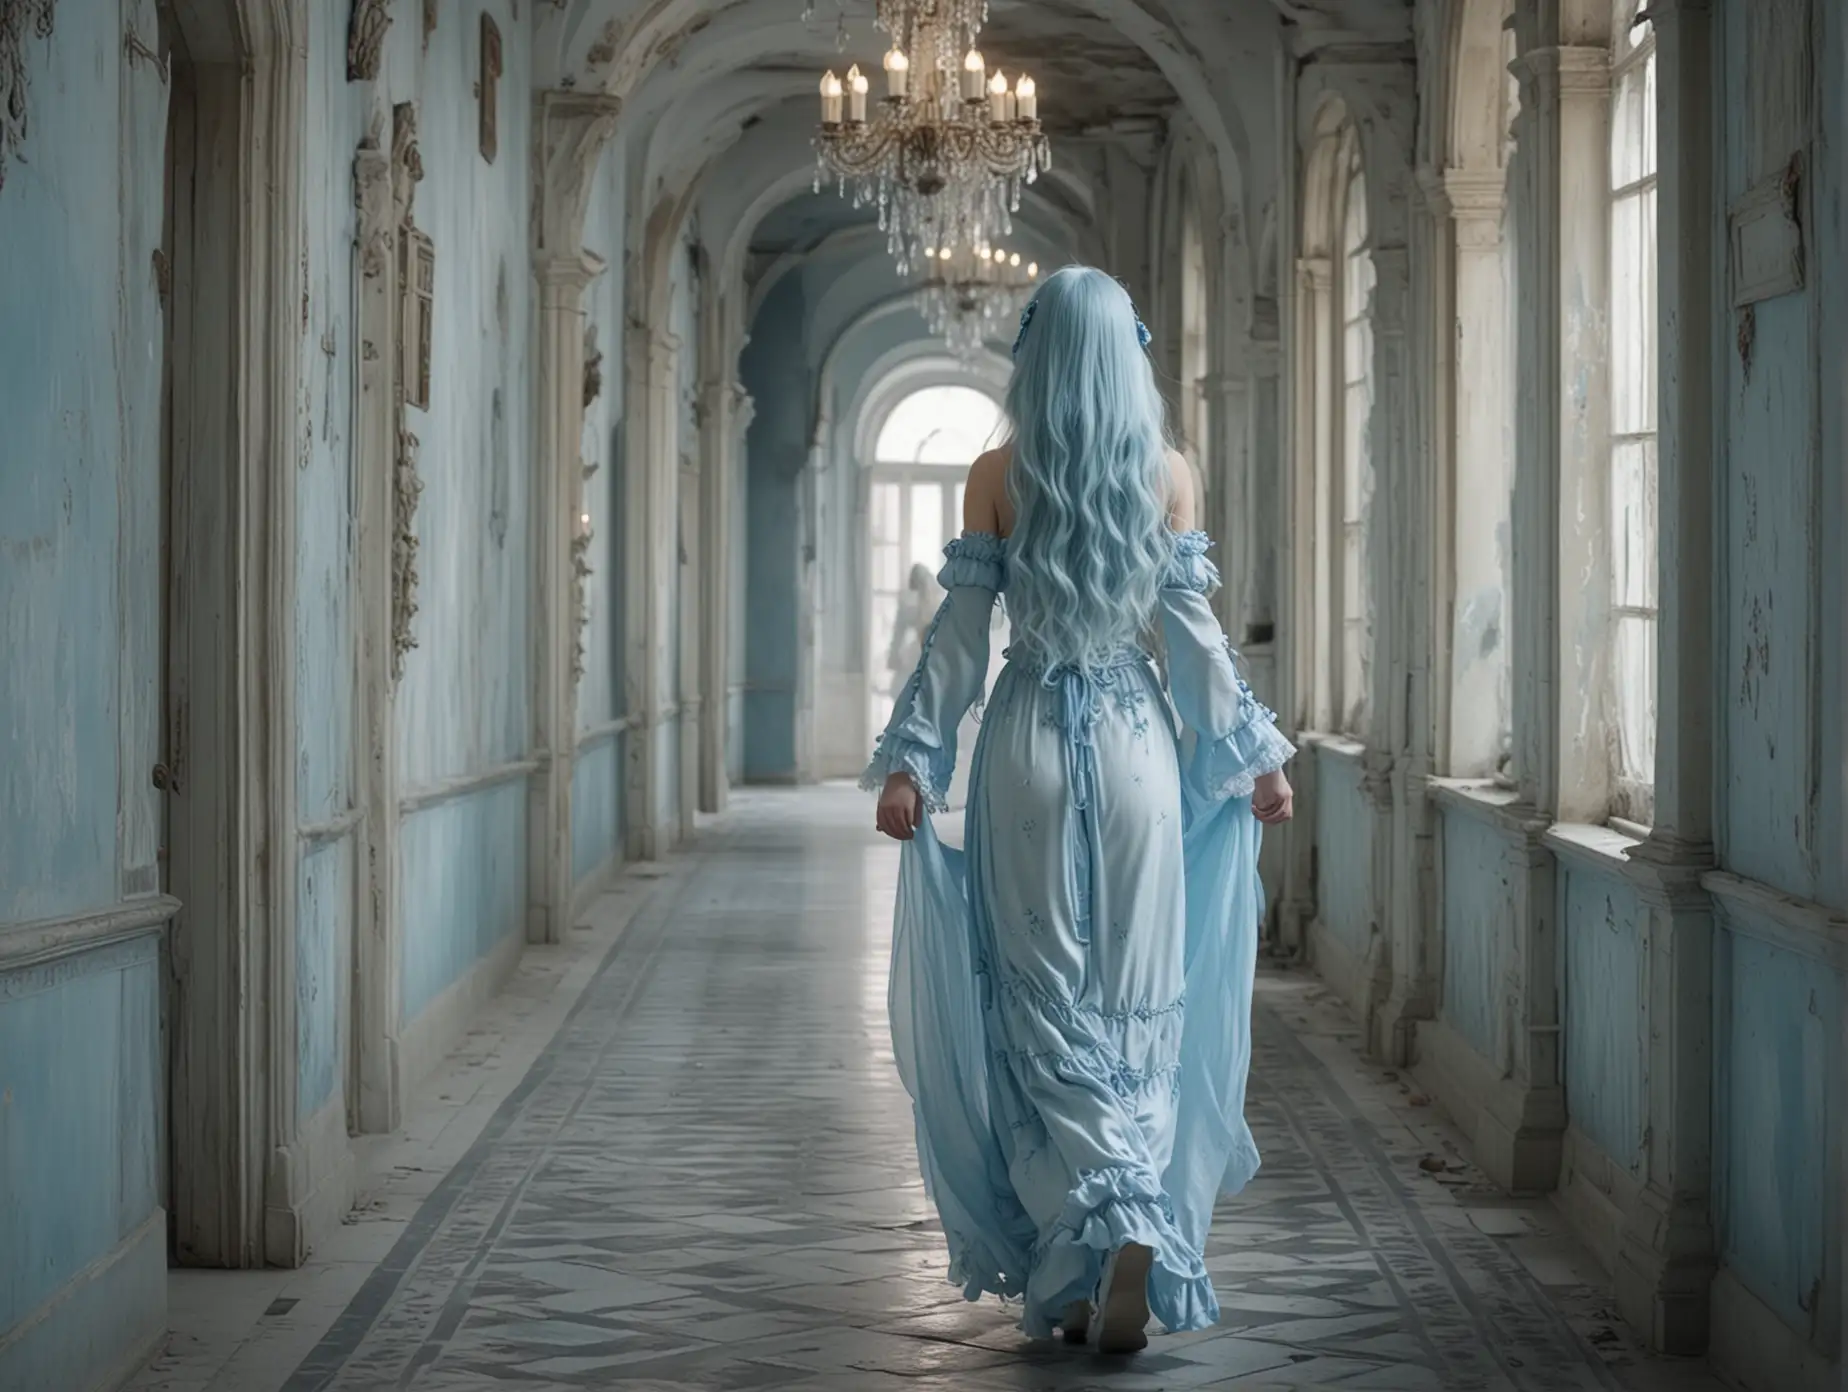 Elegant-Woman-with-Ice-Blue-Hair-in-Ornate-Antique-Corridor